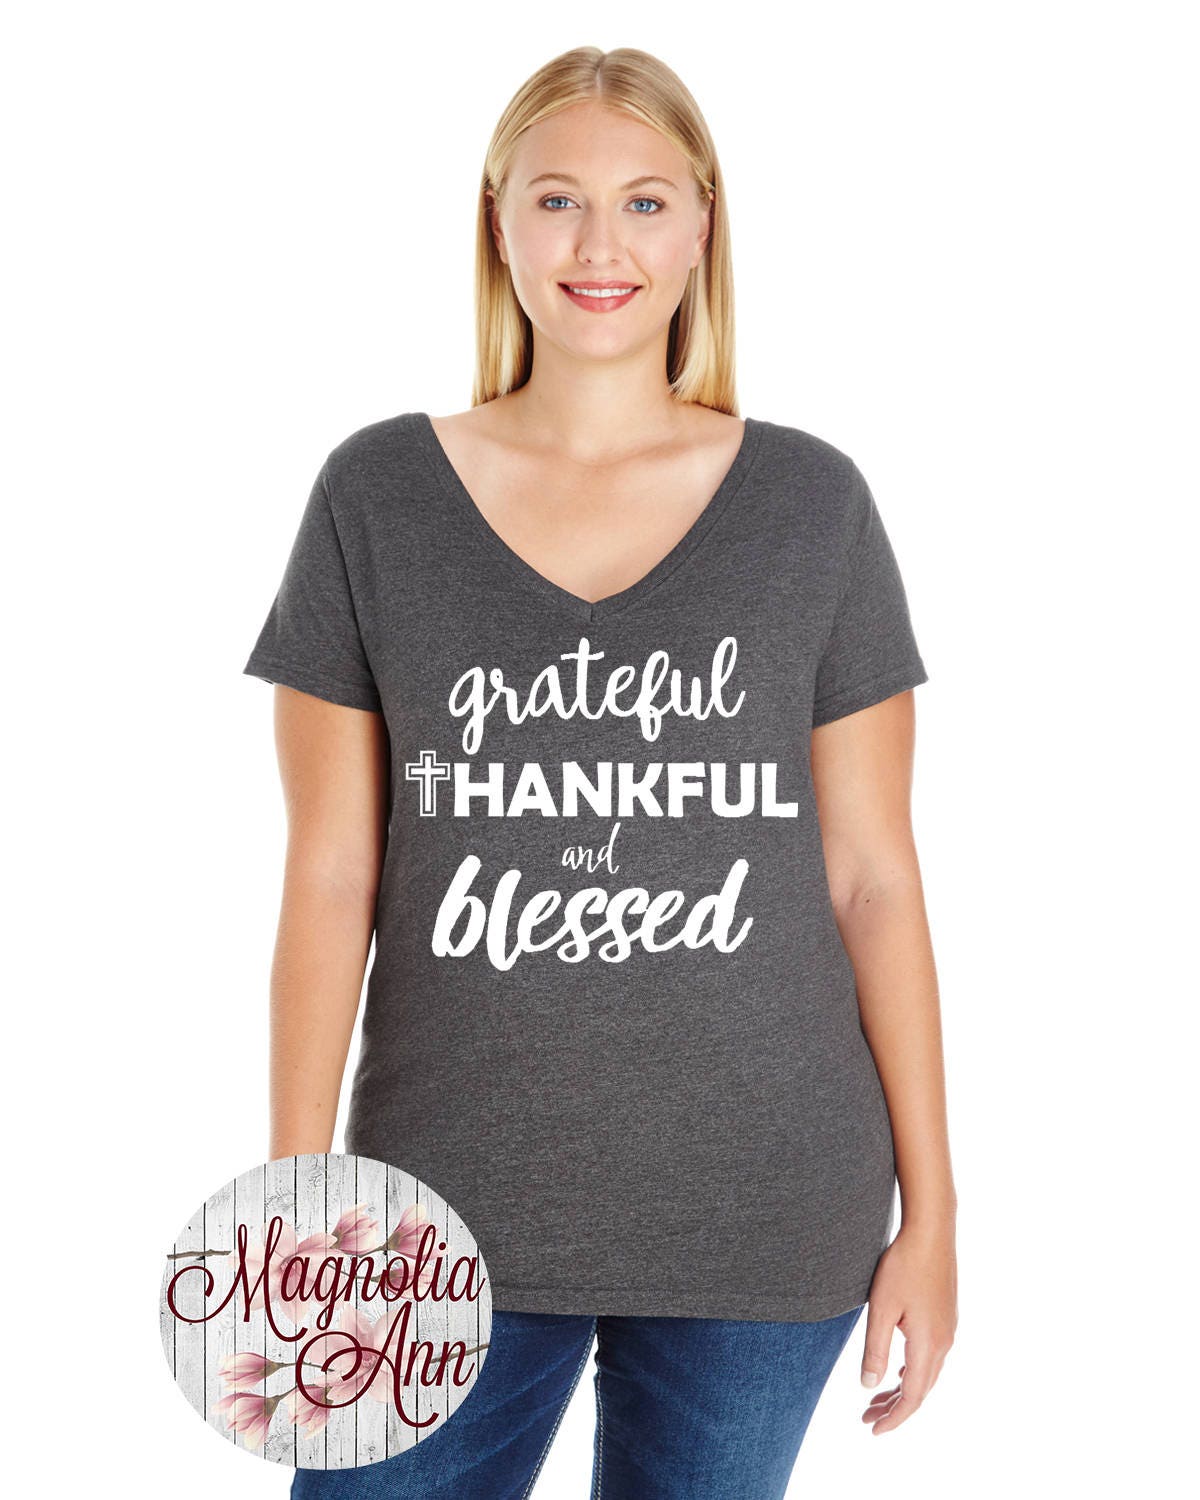 Grateful Thankful Blessed, Thanksgiving, Inspirational, Women's Premium  Jersey V-neck T-shirt in Sizes Small-4x, Plus Size, Curvy -  UK